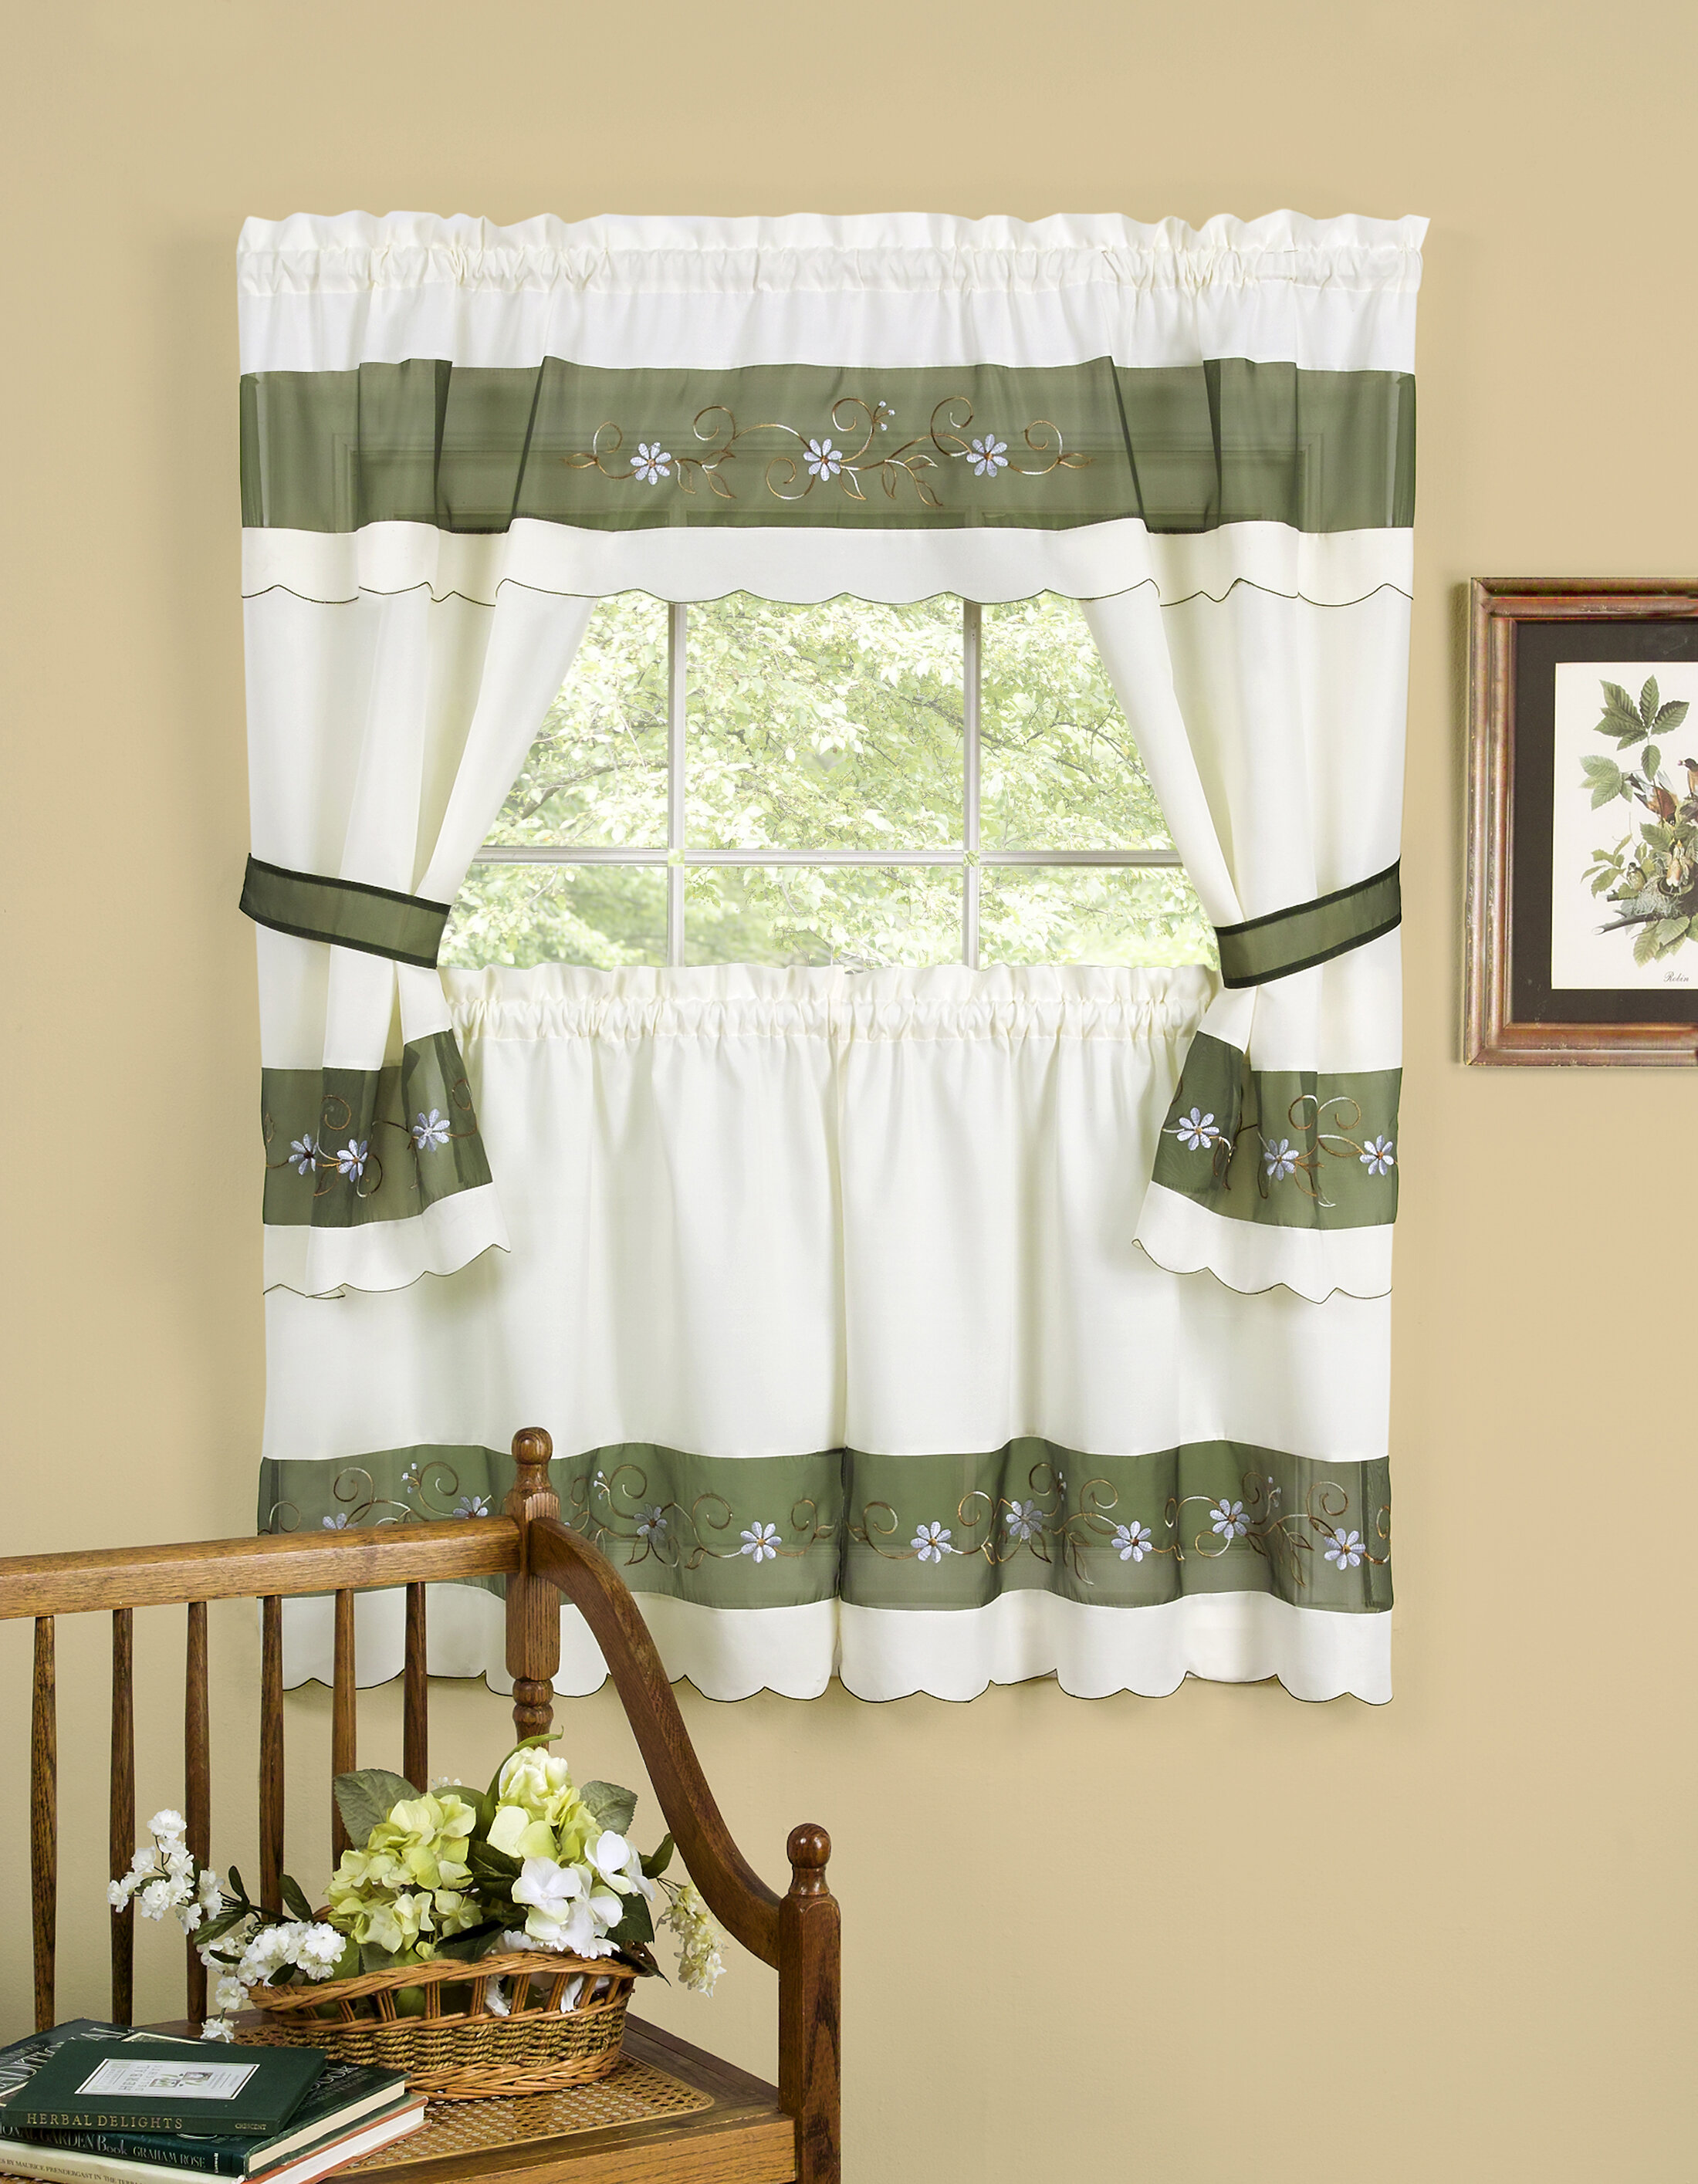 Small Panels and Valance/Swag Embellished Window Floral Kitchen Curtain Set 